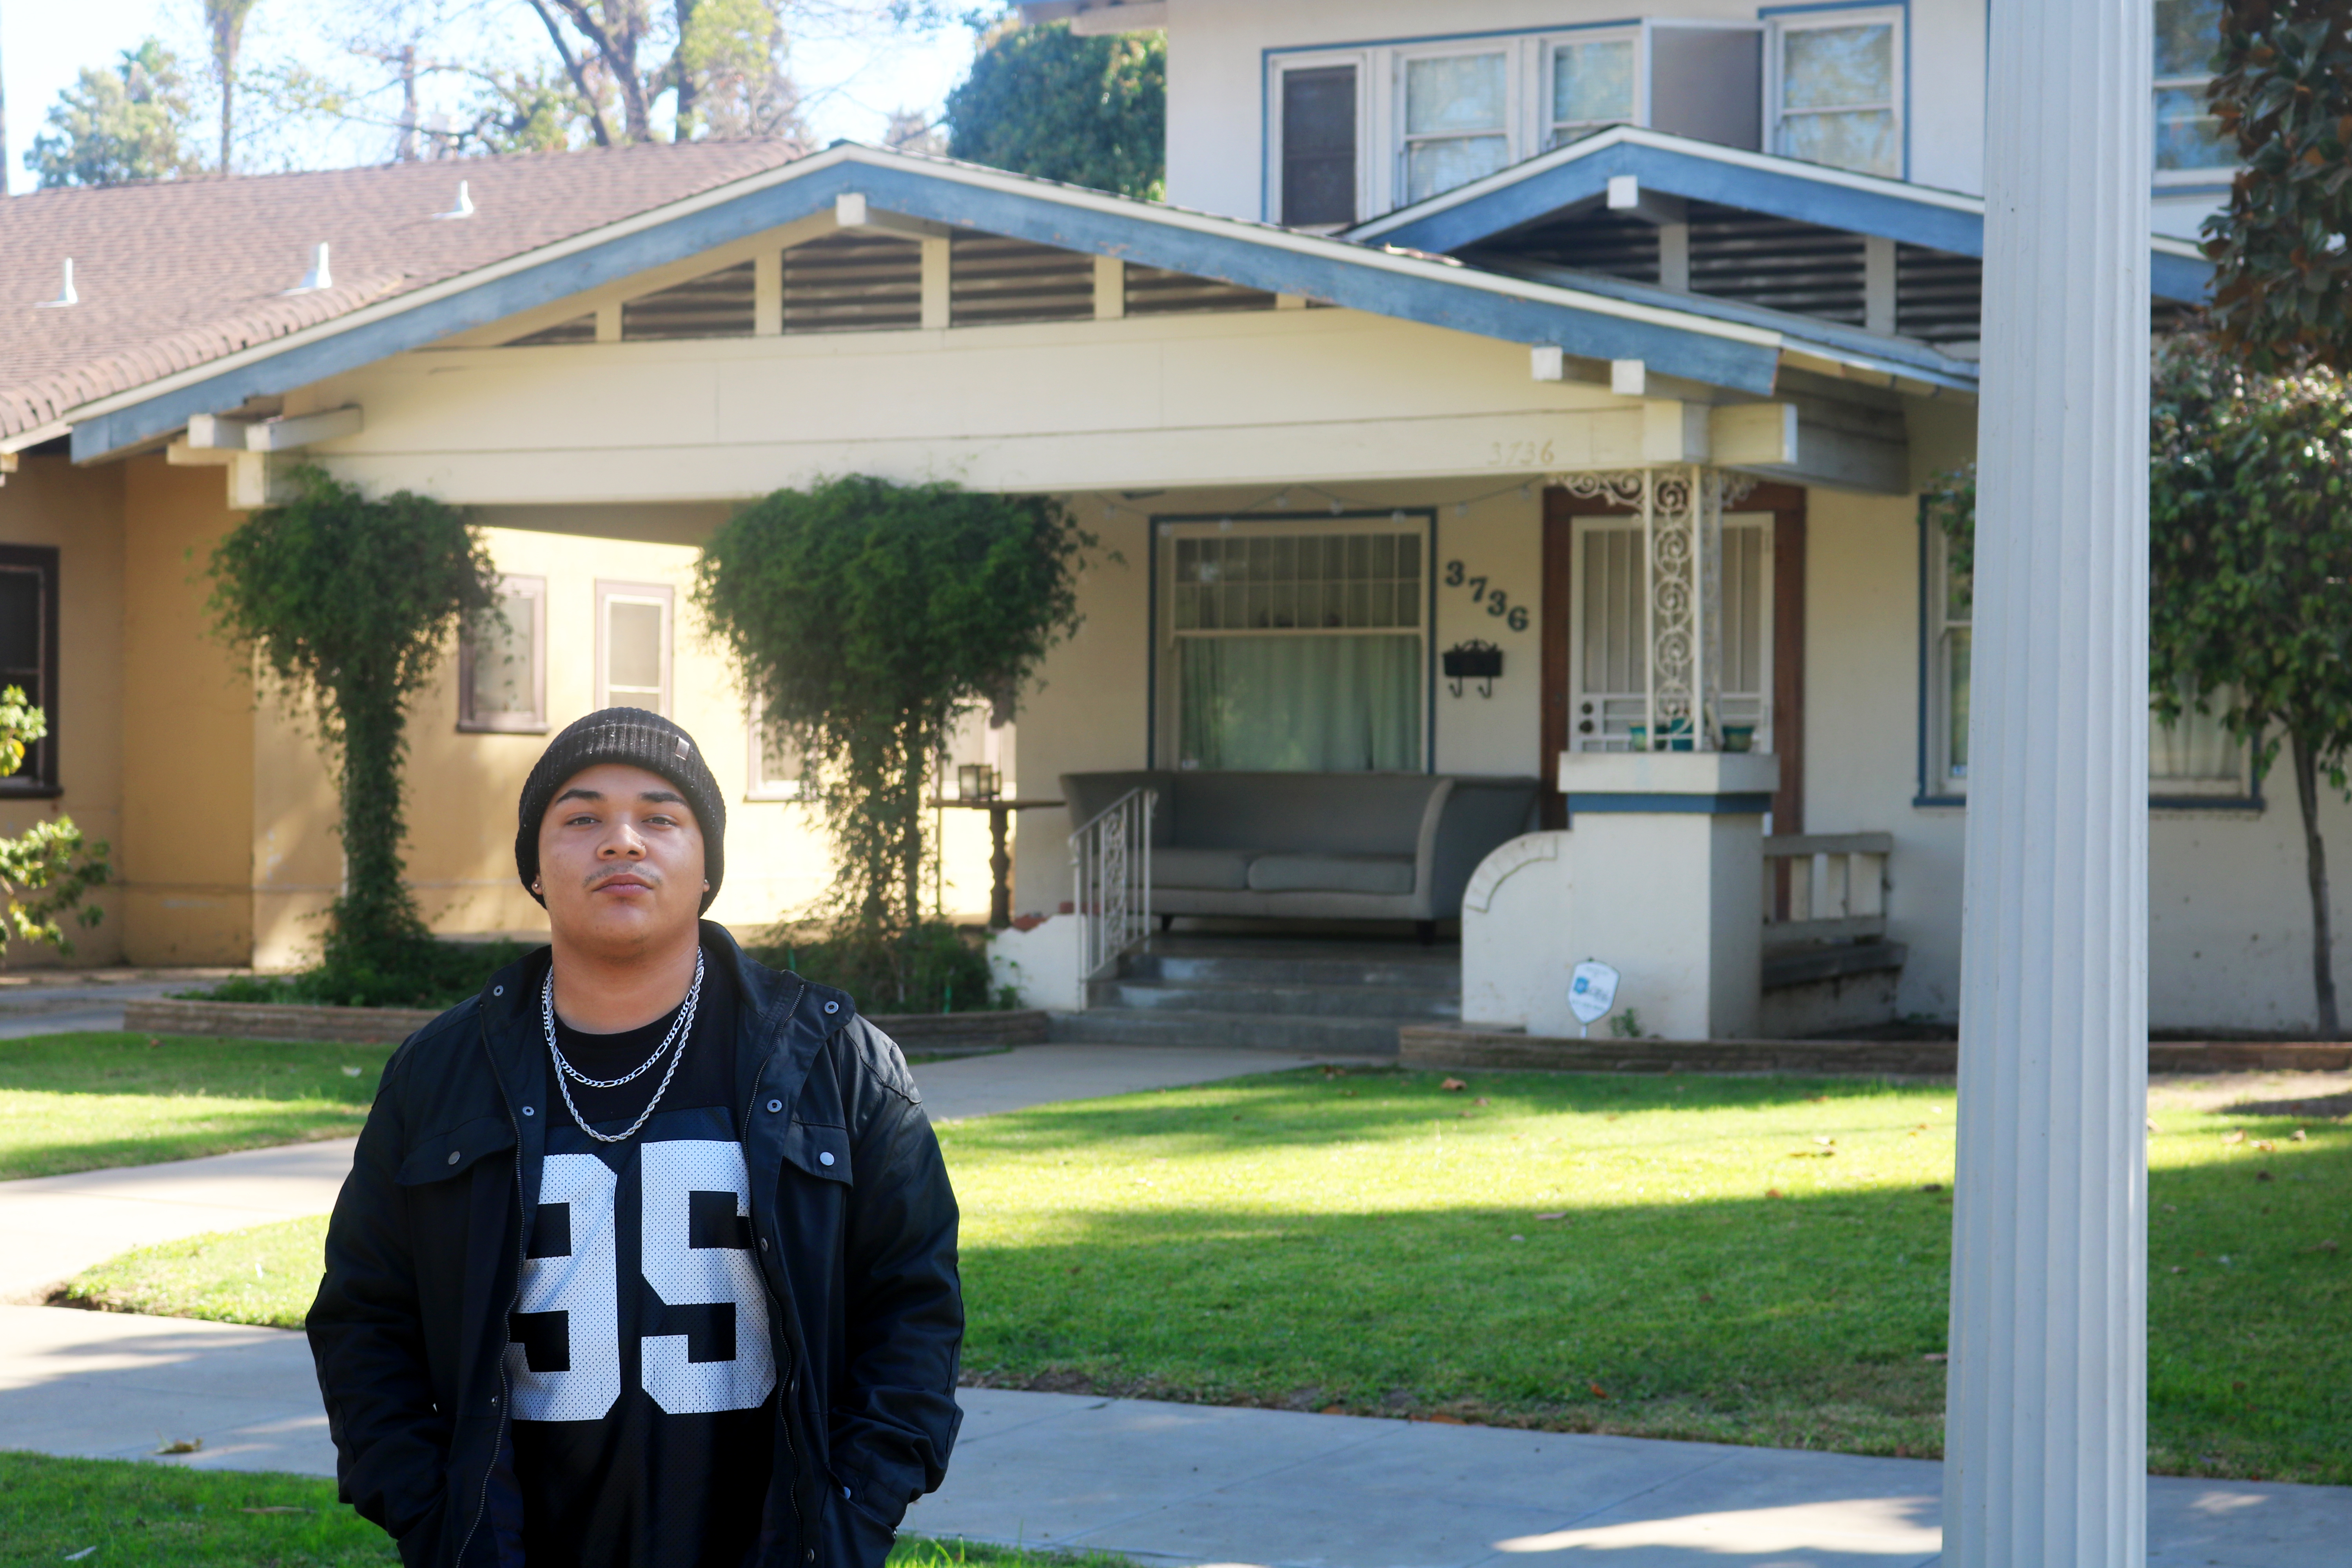 Reyna outside the home he lived in from 6th to 8th grade. 